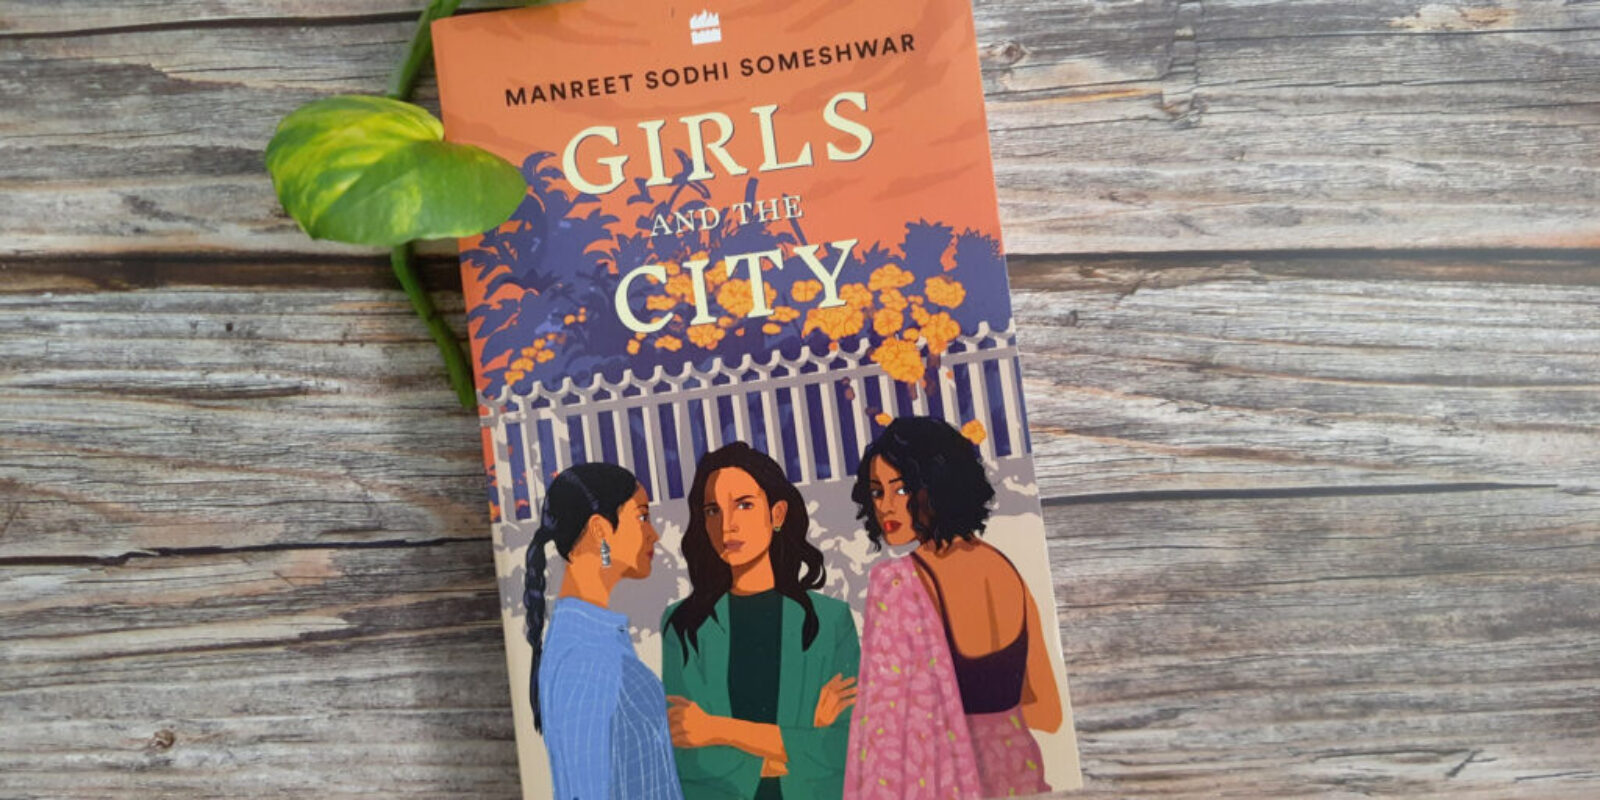 Girls-and-the-City-by-Manreet-Sodhi-Someshwar-Header